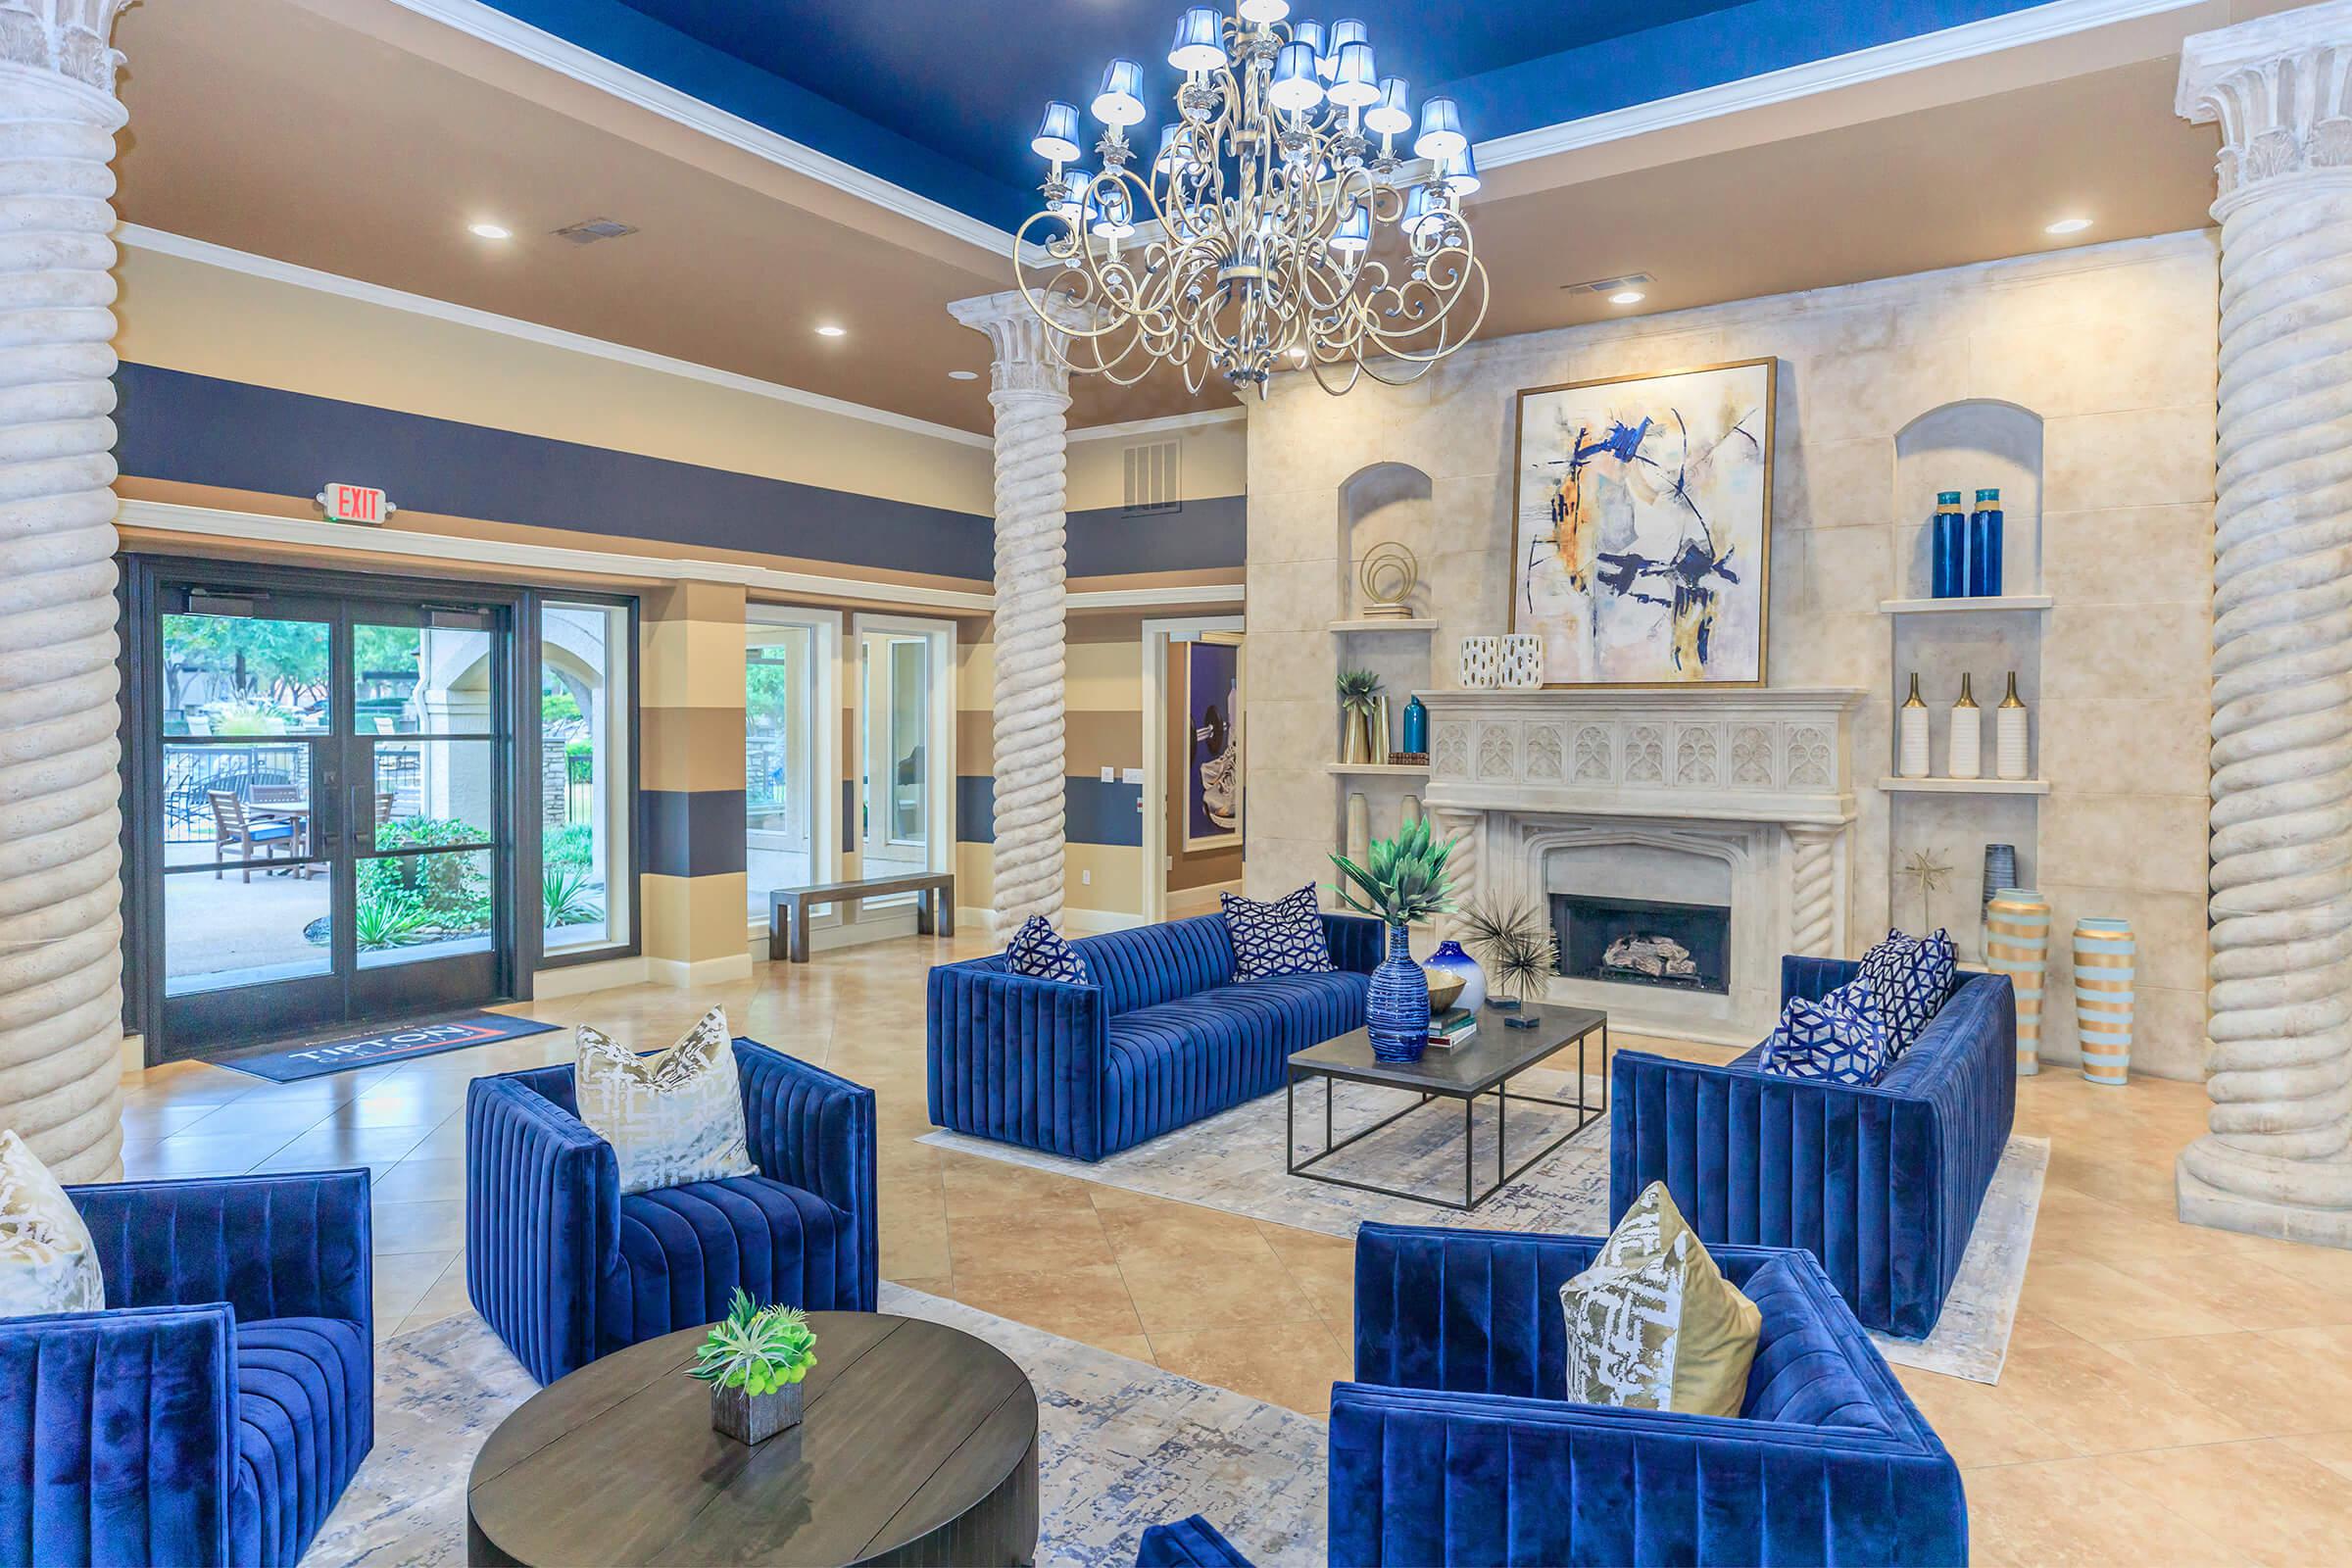 Lake Pointe community room with blue furniture